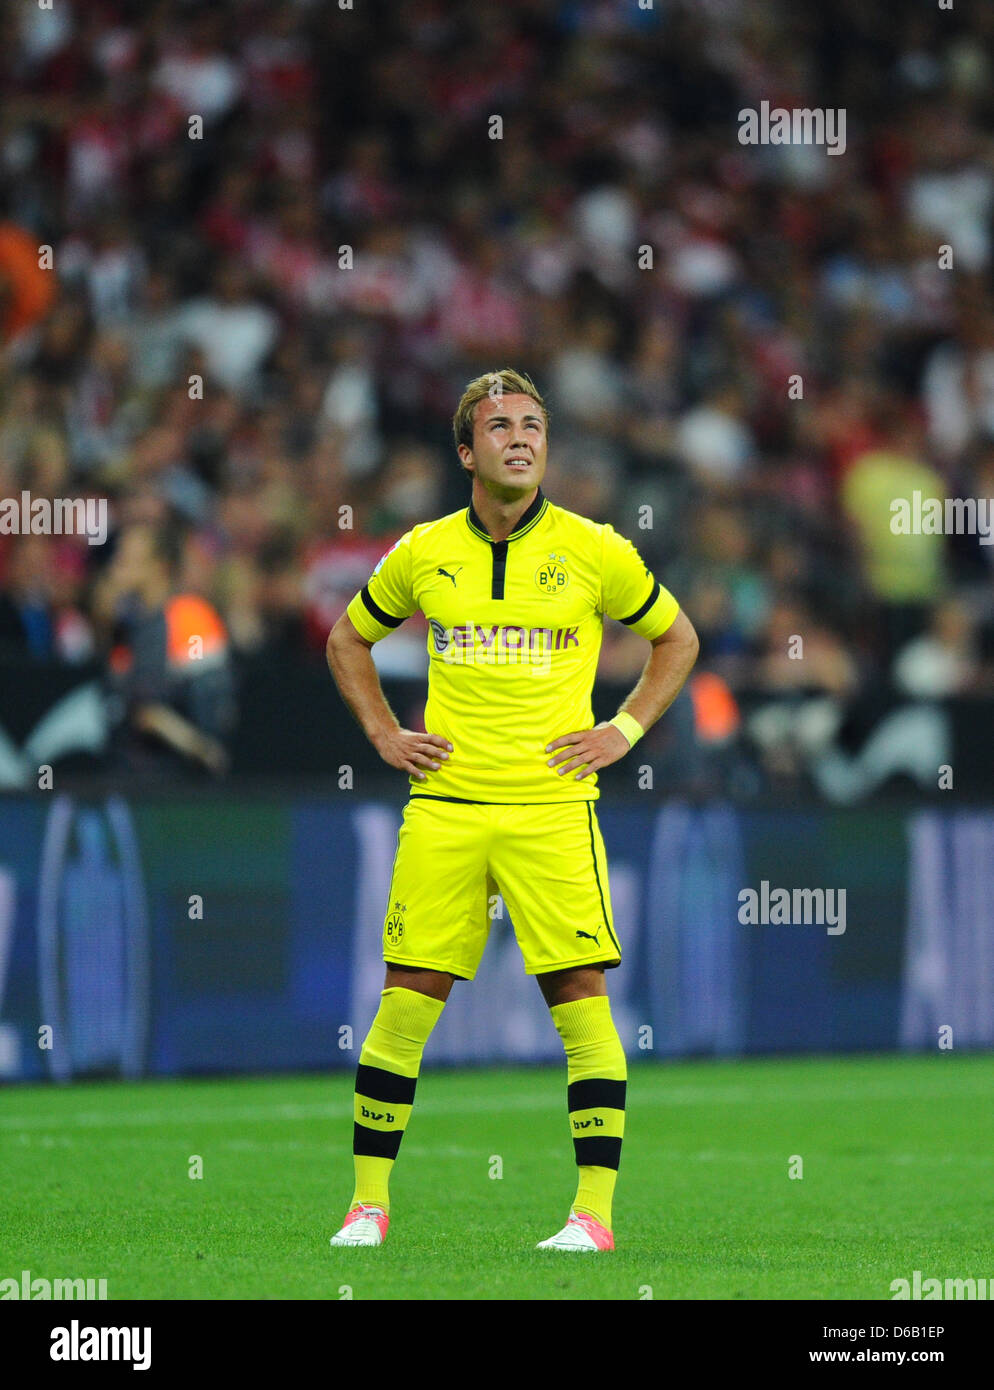 Dortmund's Mario Goetze stands on the pitch during the DFL Super Cup final match between FC Bayern Munich and Borussia Dortmund at the Allianz Arena in Munich, Germany, 12 August 2012. Photo: Thomas Eisenhuth Stock Photo